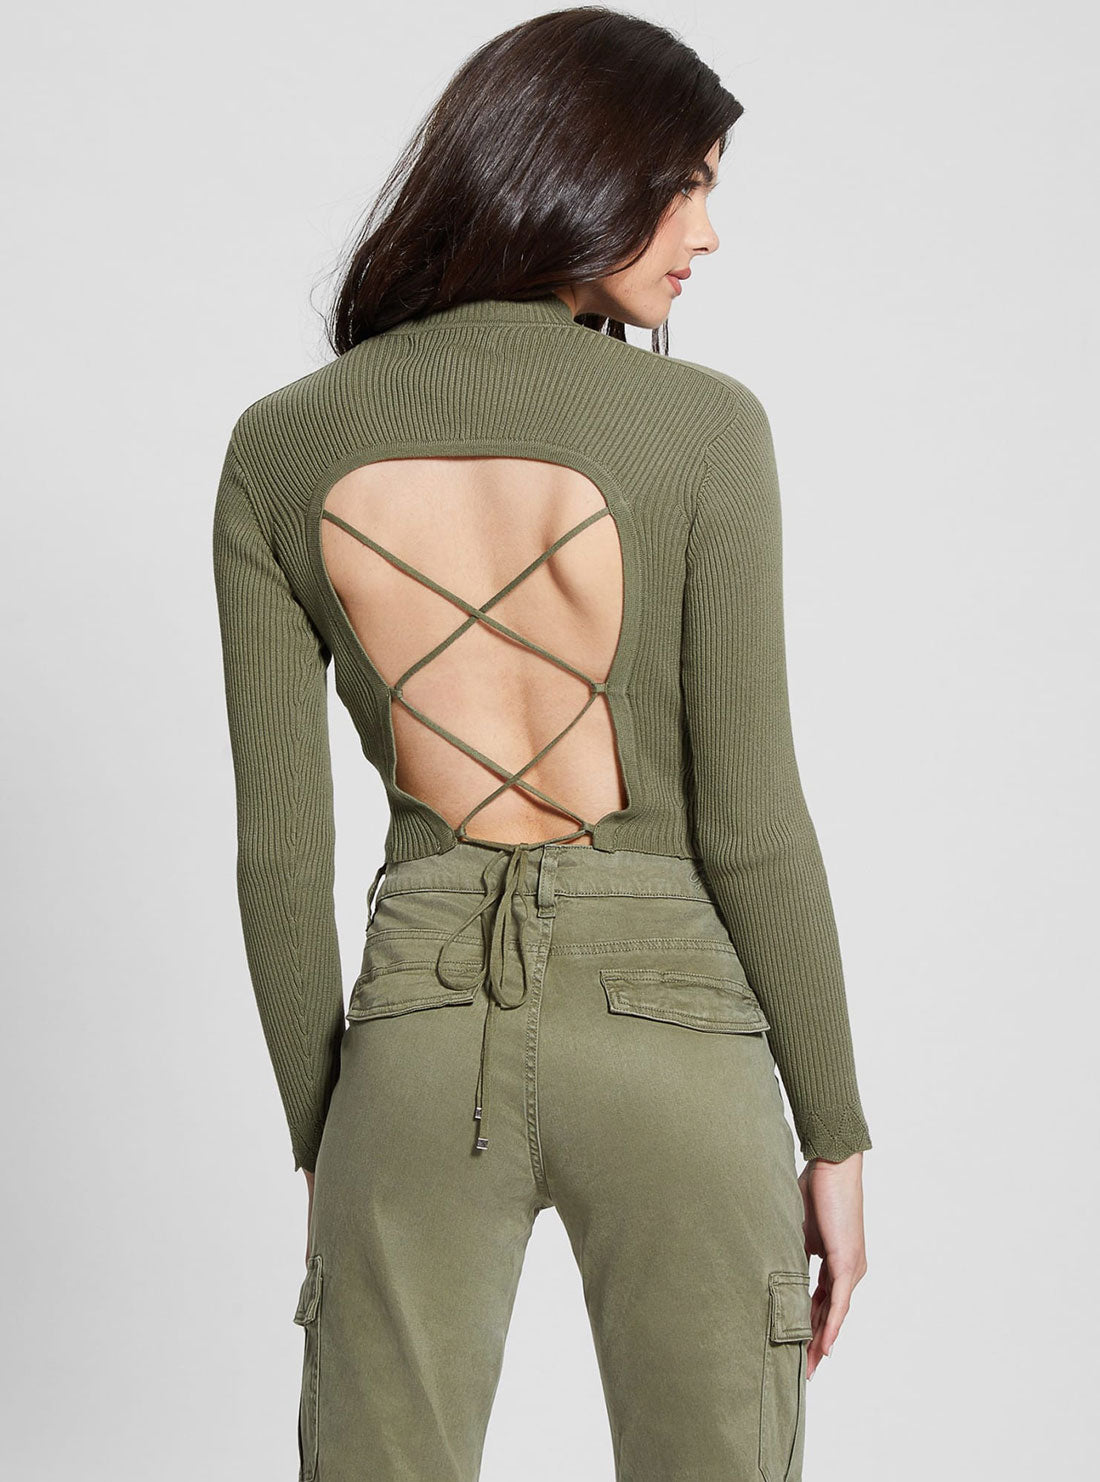 GUESS Green Marie Open Back Knit Top back view